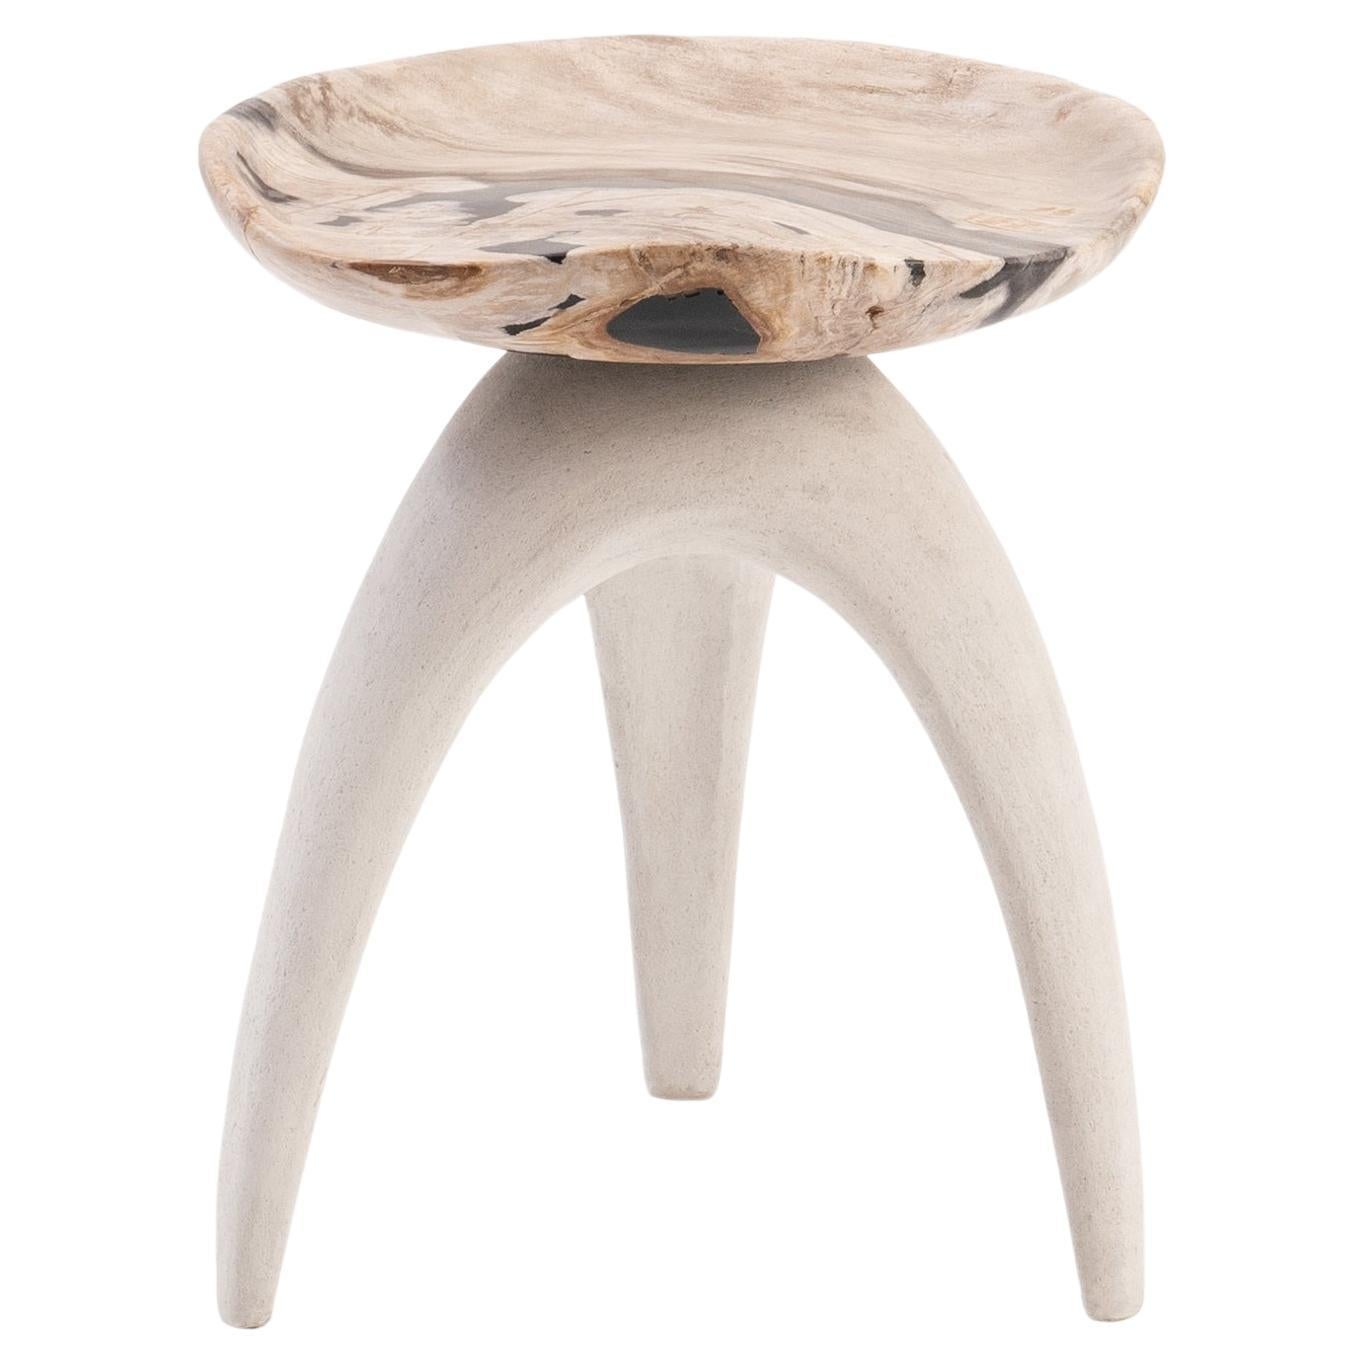 Bermuda Triangle • Hand-Carved Solid Petrified Wood Stool by Odditi For Sale